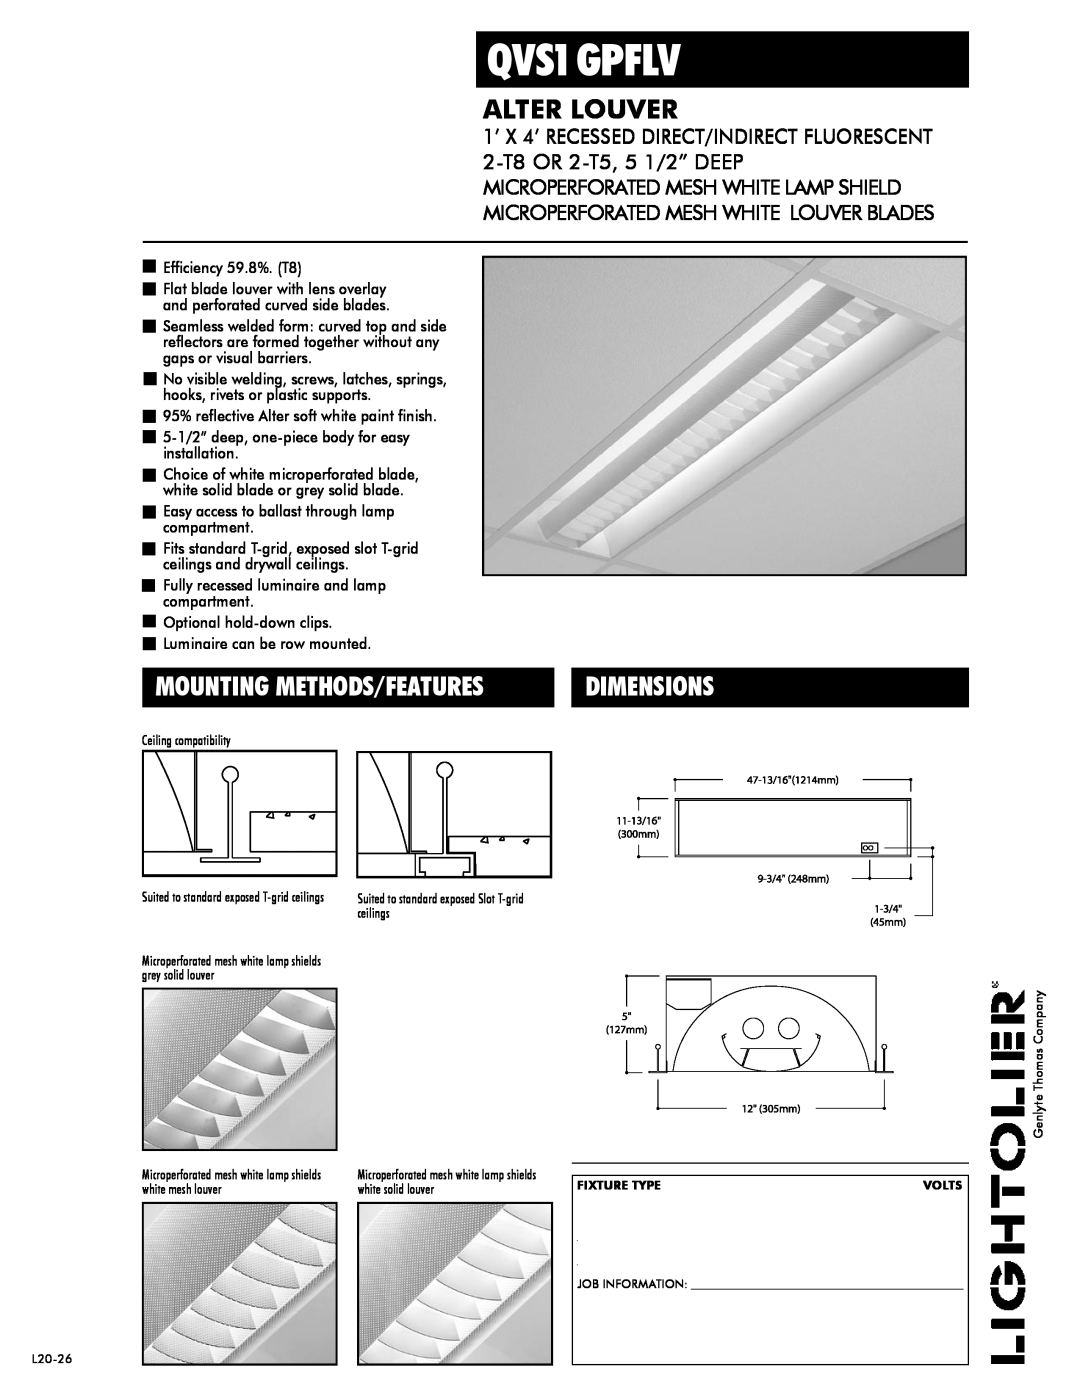 Lightolier QVS1GPFLV dimensions Genlyte Thomas Company, Mounting Methods/Features, Dimensions, Alter Louver, Fixture Type 